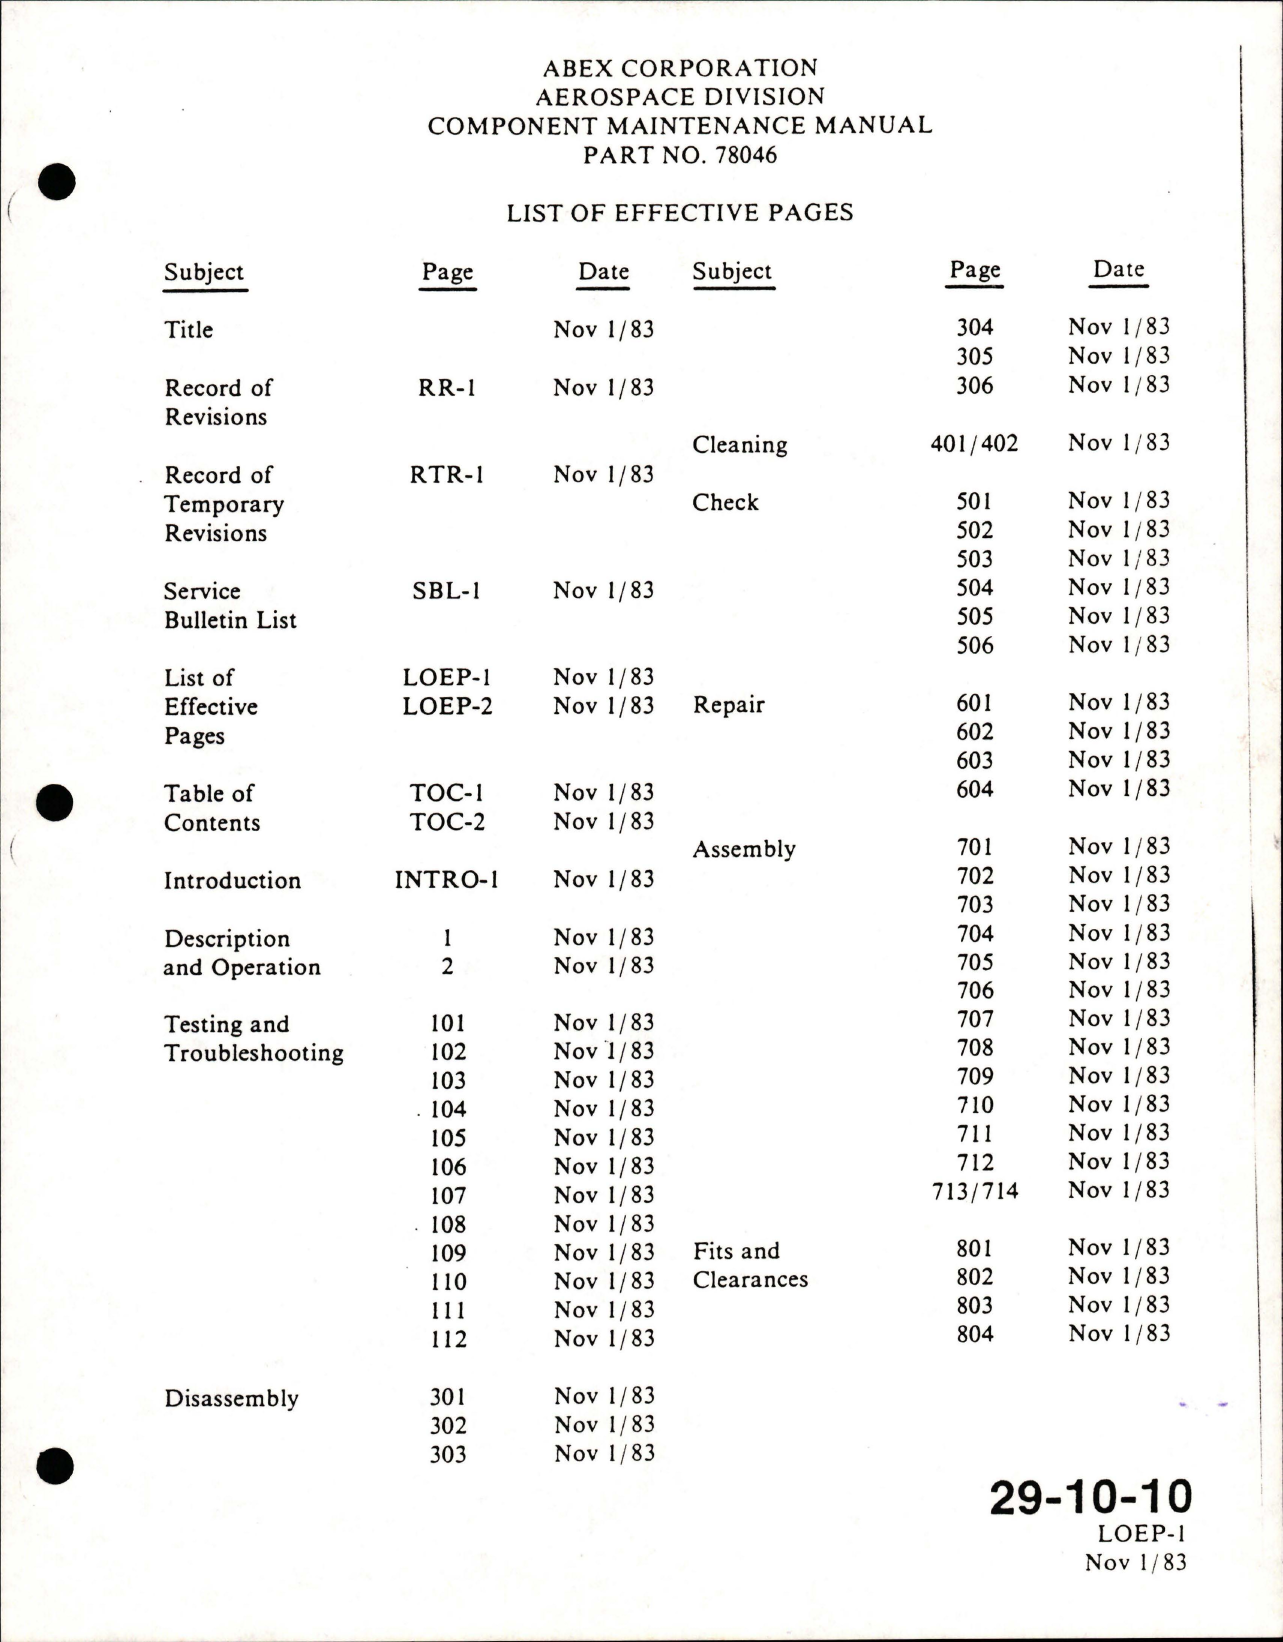 Sample page 5 from AirCorps Library document: Maintenance with Illustrated Parts List for Variable Delivery Hydraulic Pump - Part 55110, 55110-01